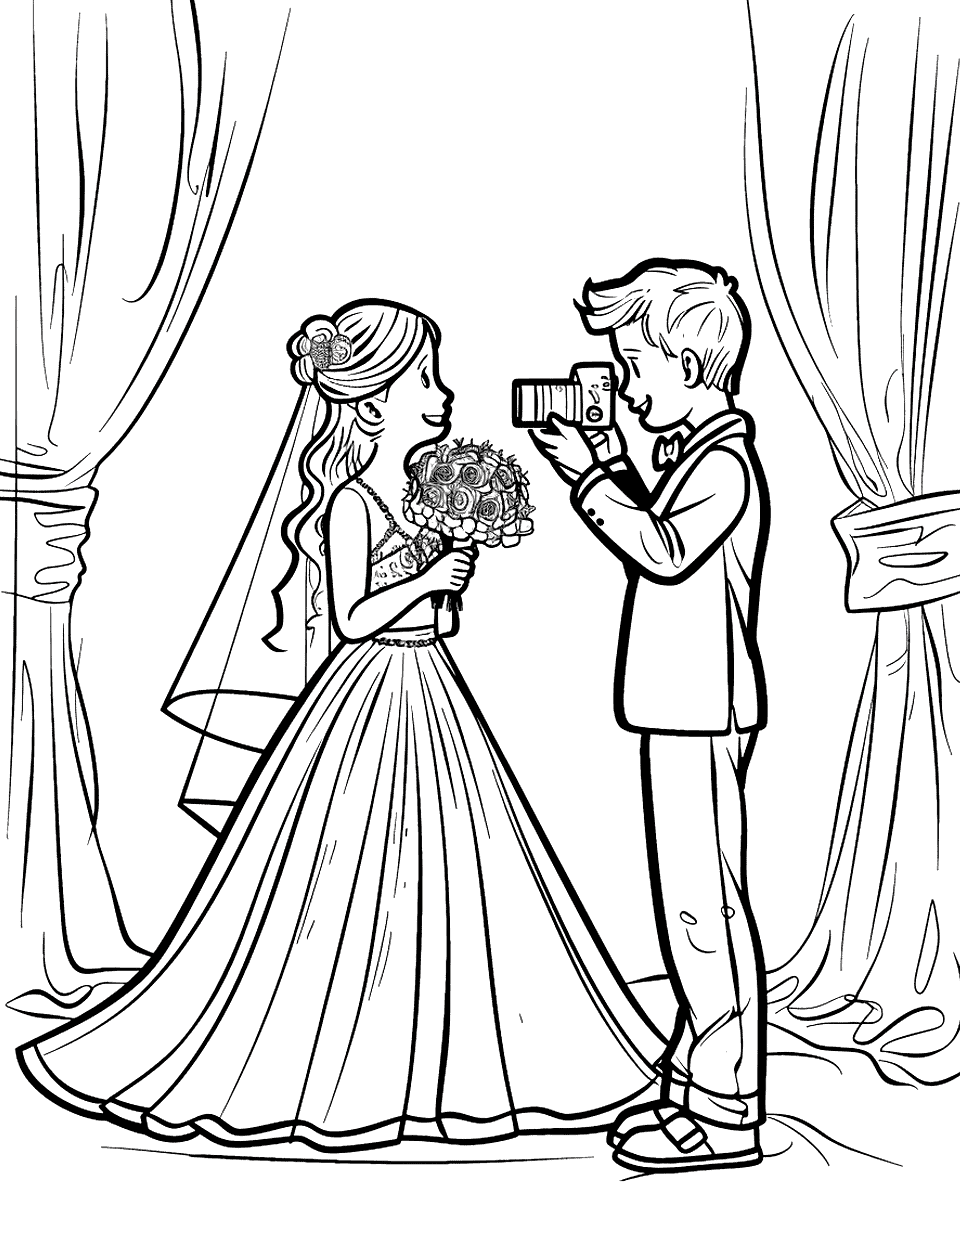 Wedding Photographer at Work Coloring Page - A photographer, taking close pictures of the bride.